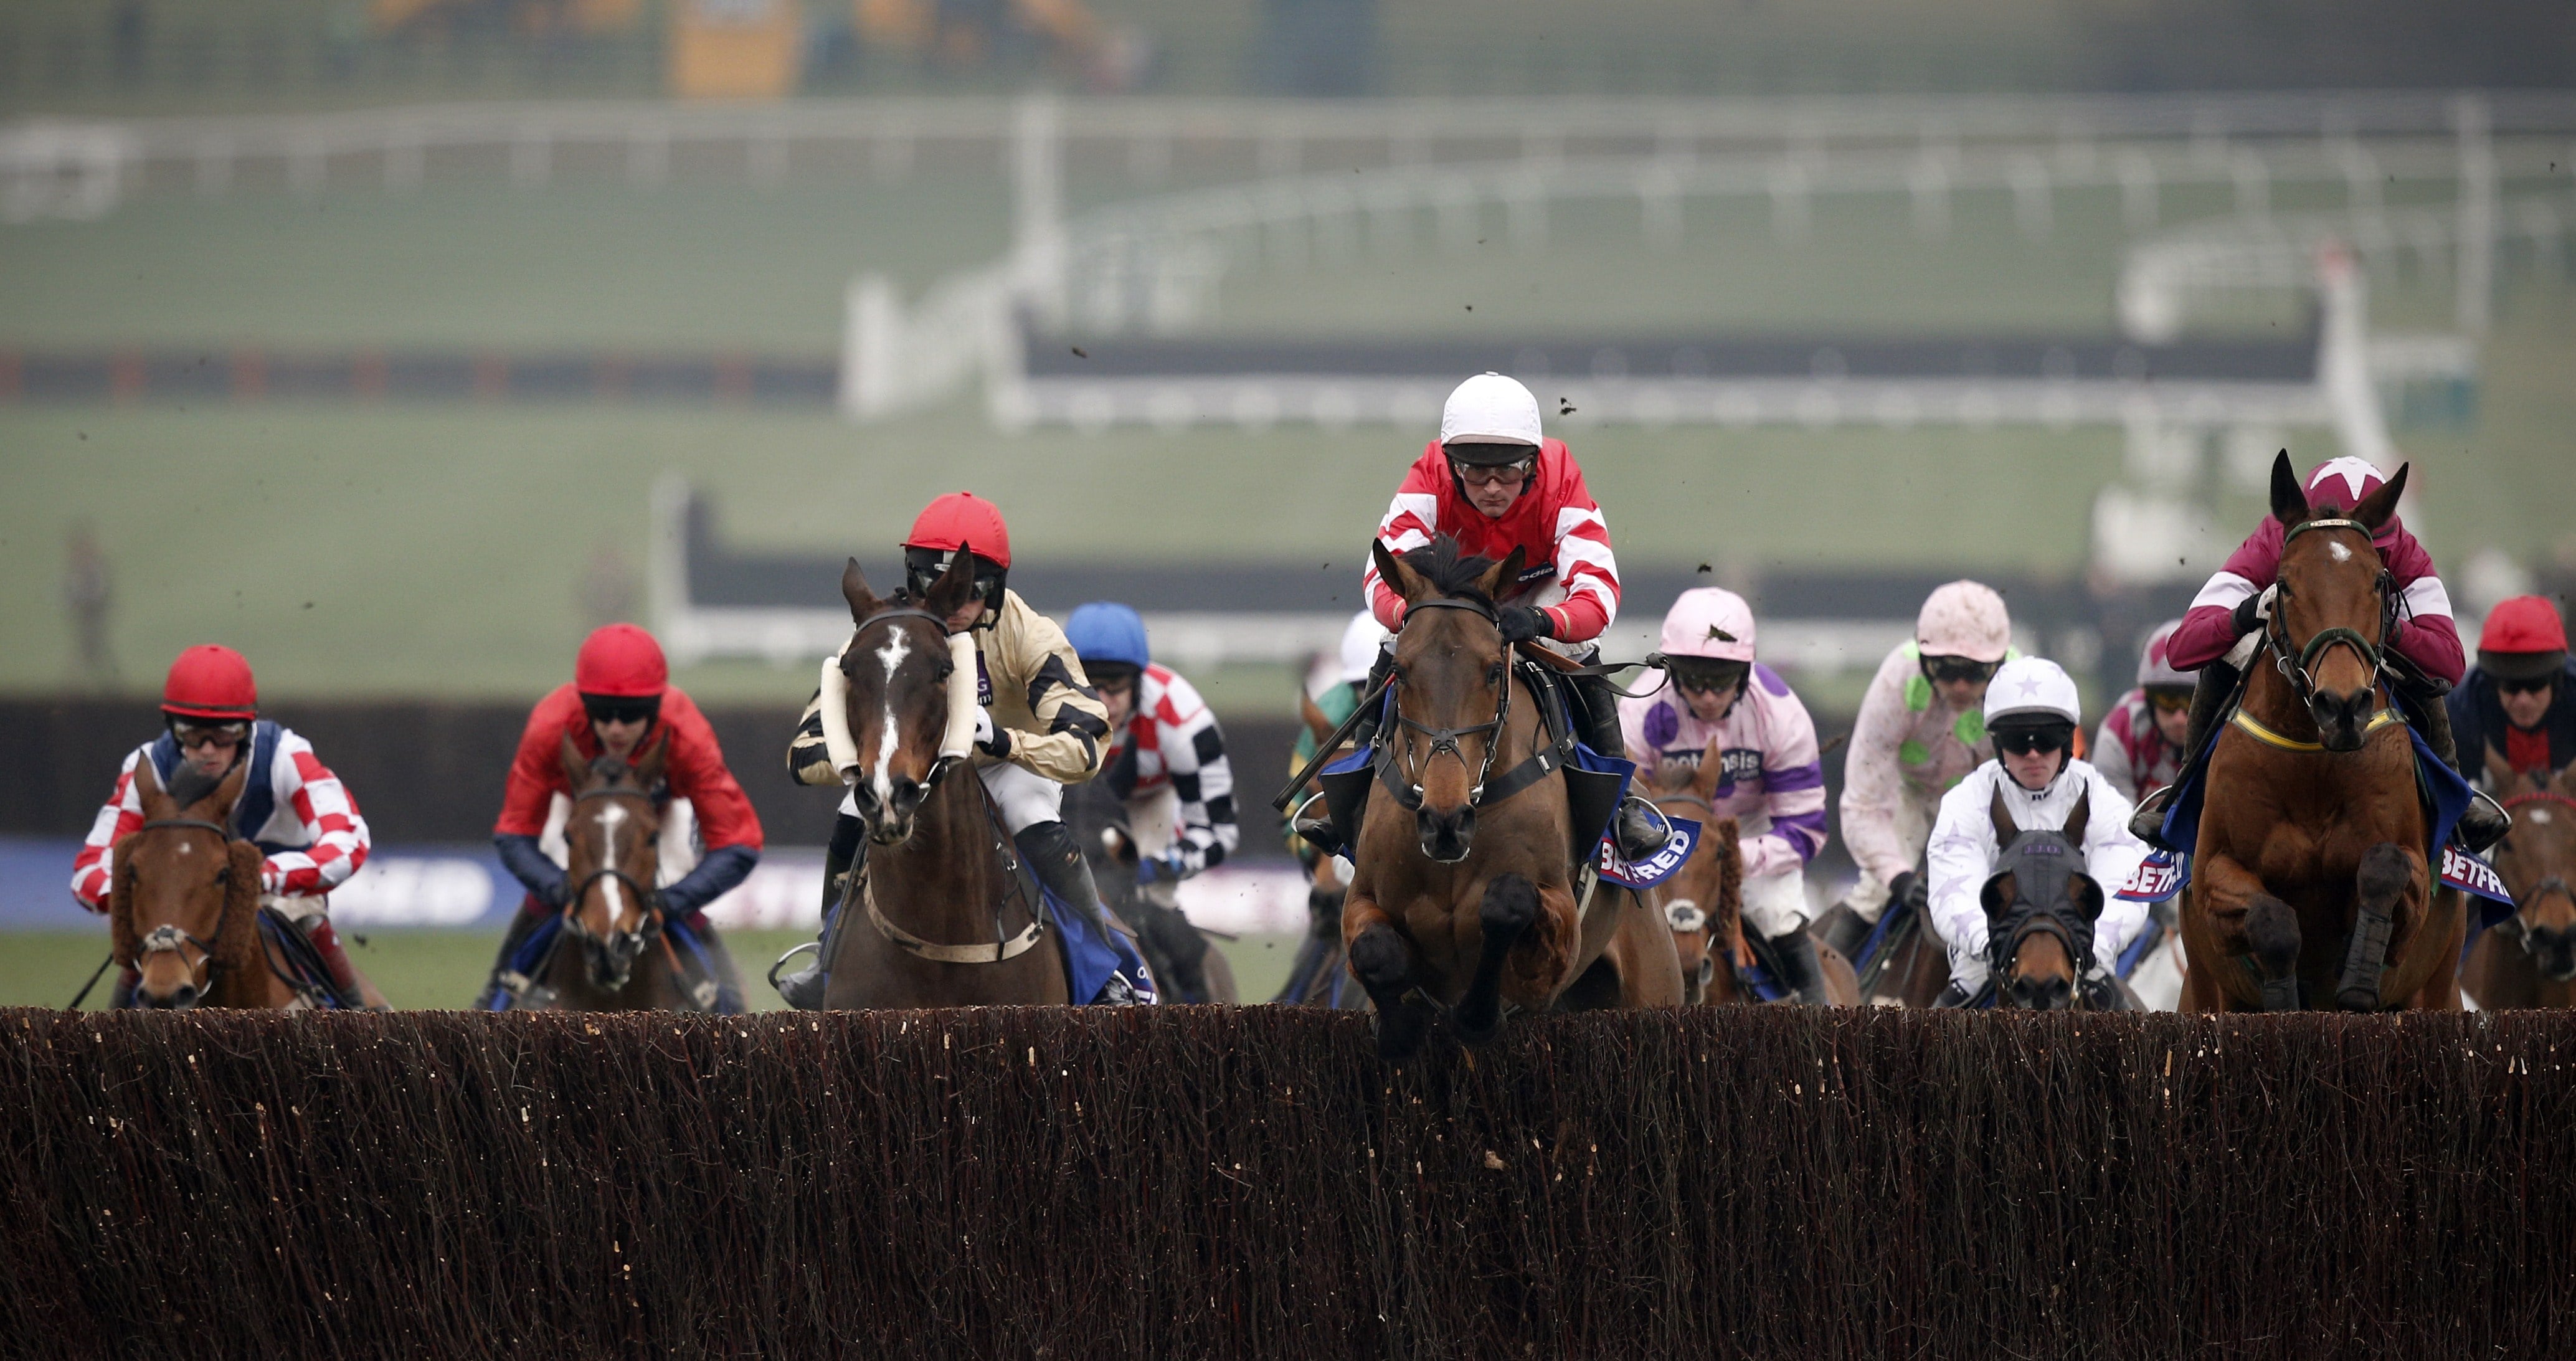 Big Buck’s sits in behind the leaders, after the first circuit in the 2012 Stayers’ Hurdle.